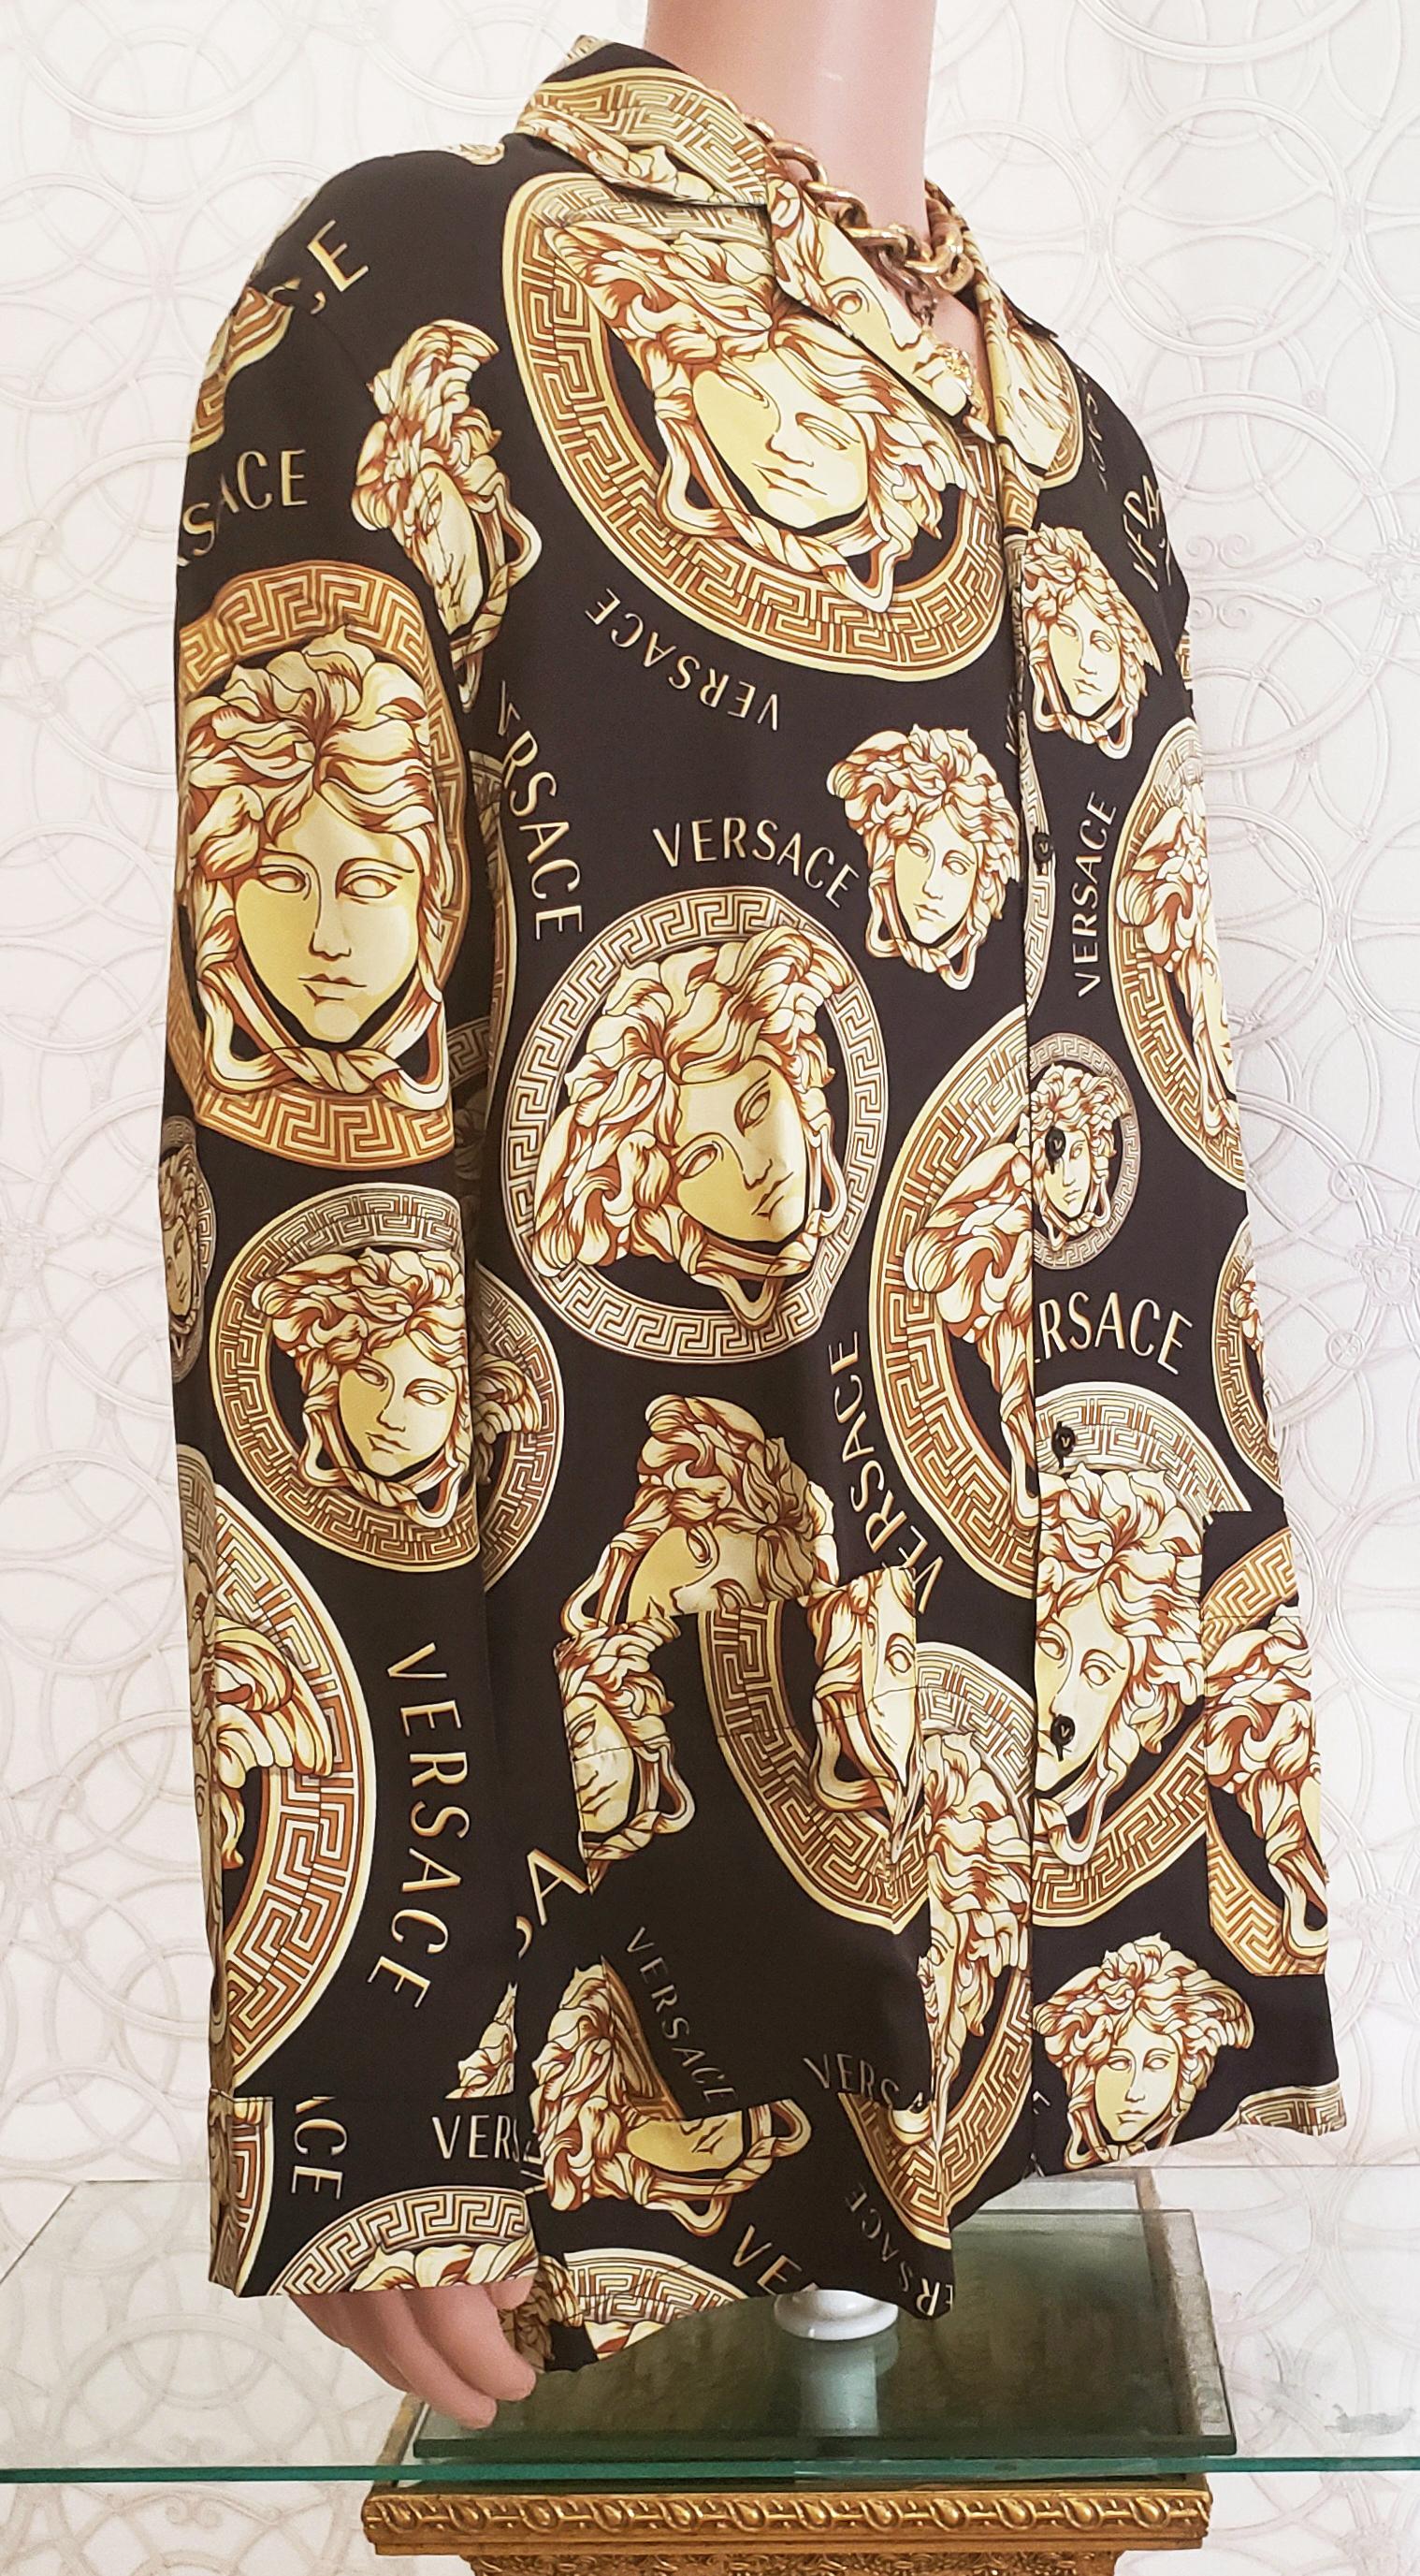 VERSACE SILK SHIRT

A luxurious pajama shirt crafted from exceptional quality silk twill. 

The classic style features the golden Medusa Amplified print.

Notch collar

Long sleeves

Button front

Content: 100% Silk

Made in Italy 


IT Size 50-US